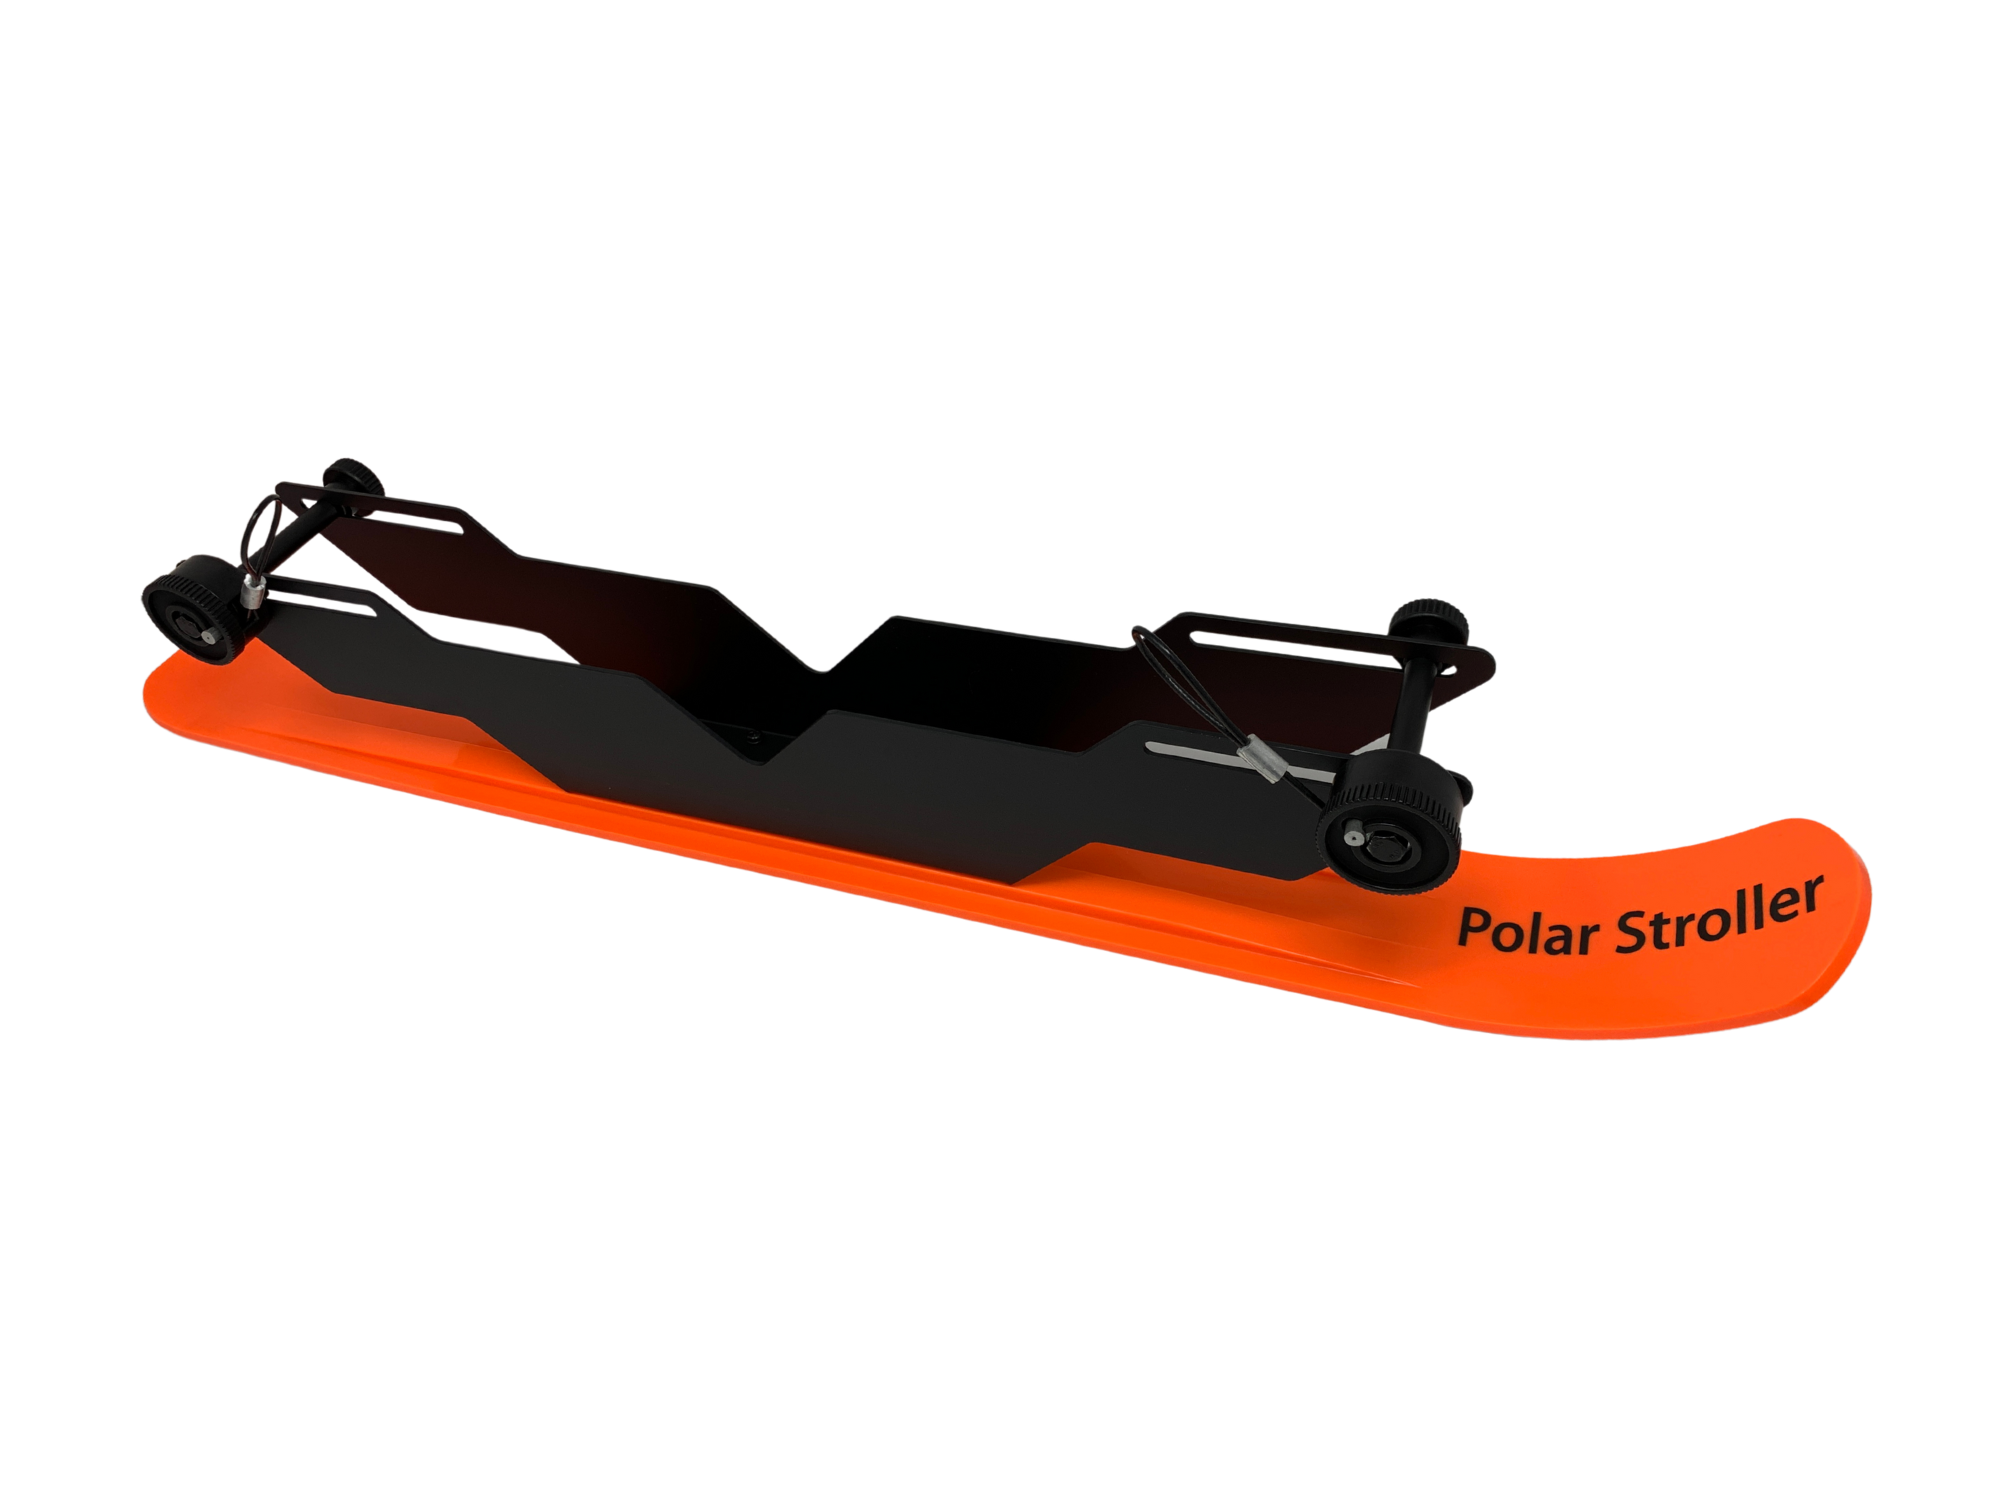 Polar Skis for people needing a single skis for large 26” wheels.